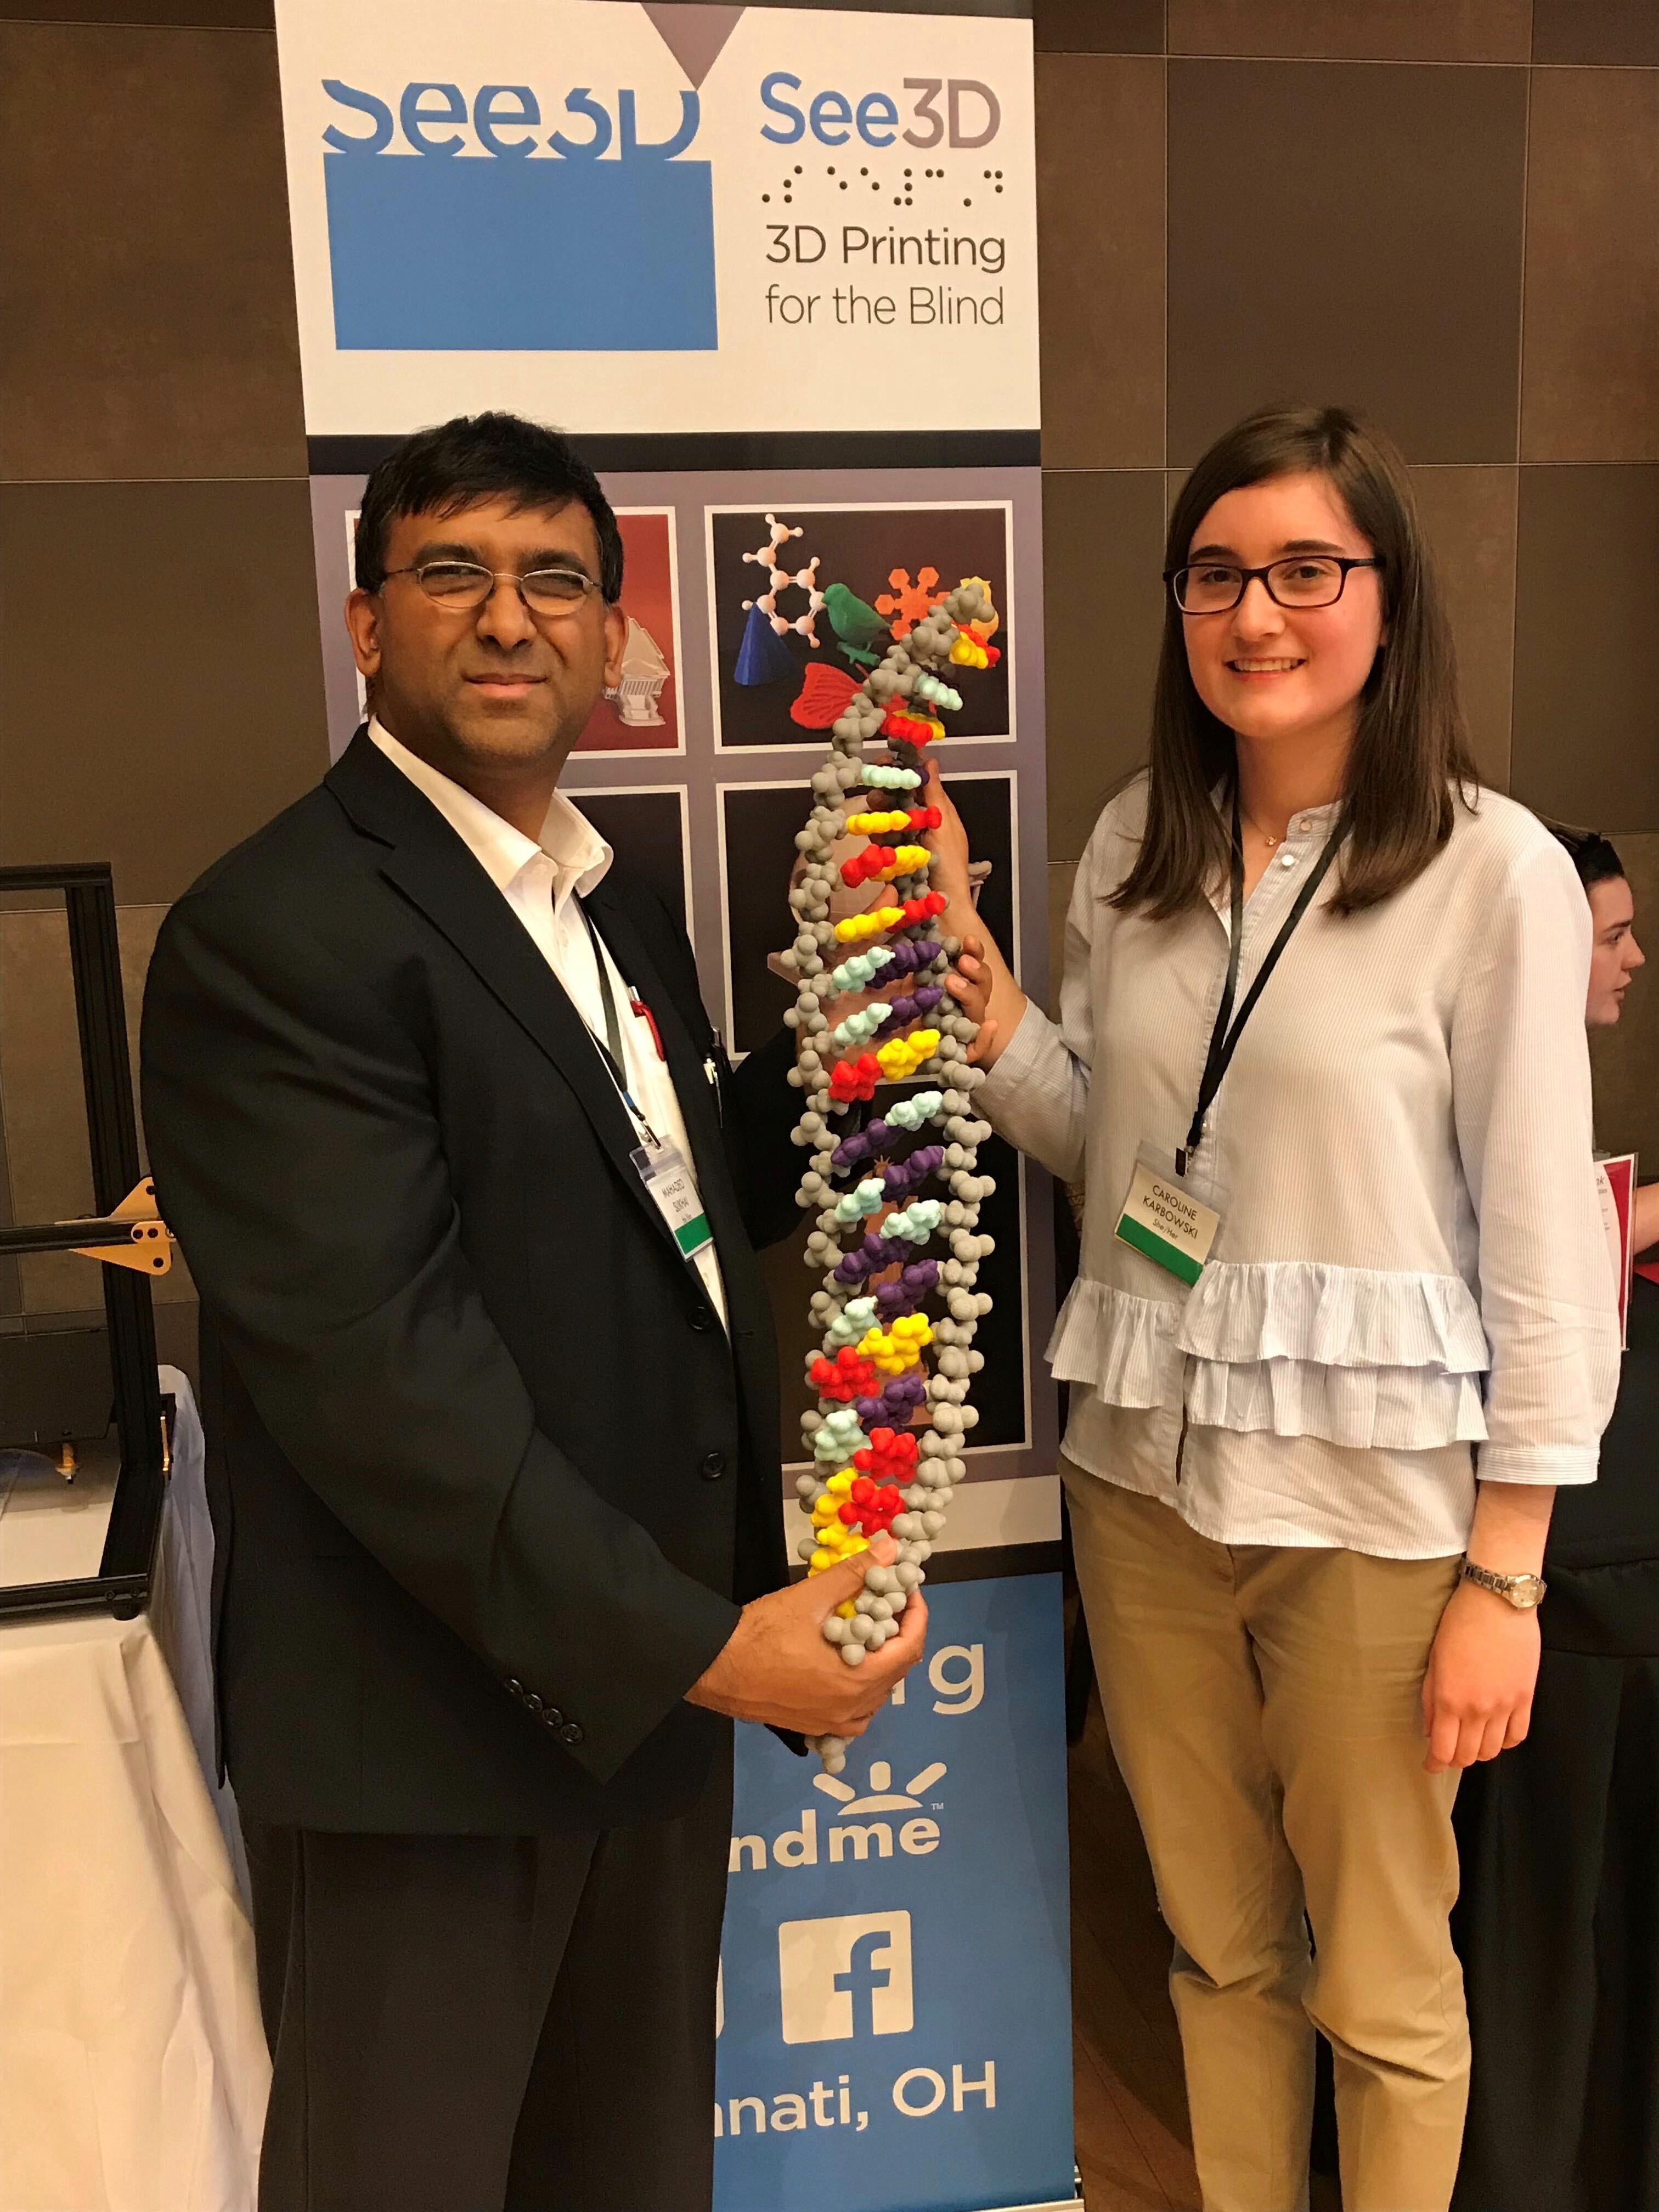 A picture of our CEO Caroline Karbowski with Dr. Sukhai holding a multi colored 3-D model of DNA